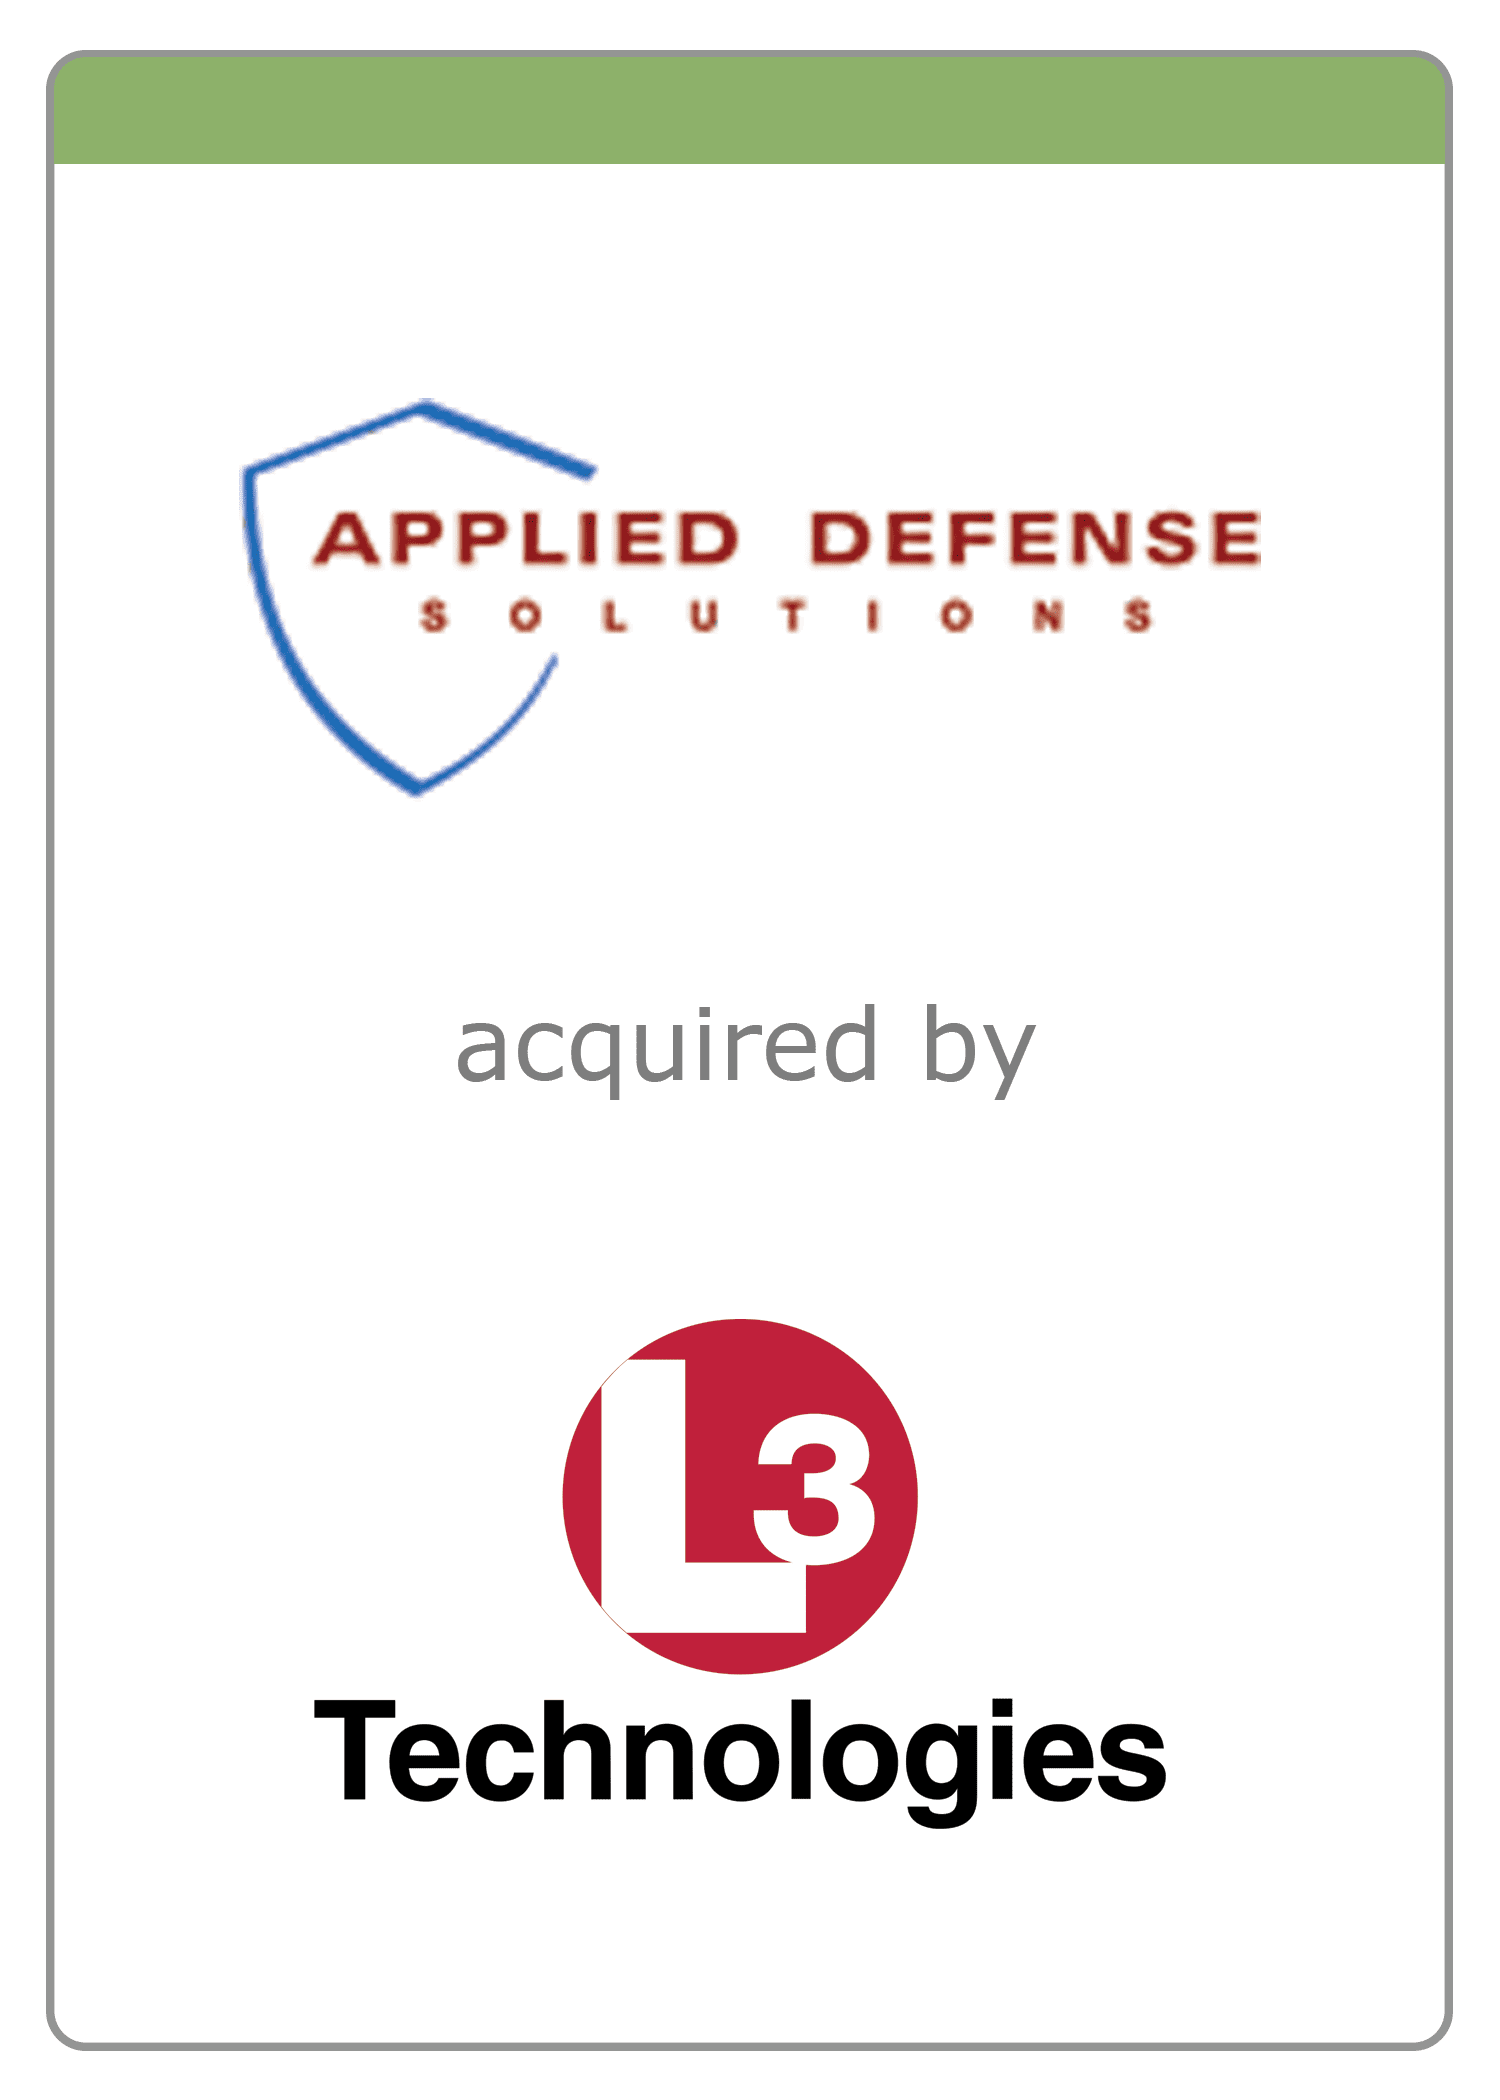 Applied Defense Solutions acquired by L3 - The McLean Group